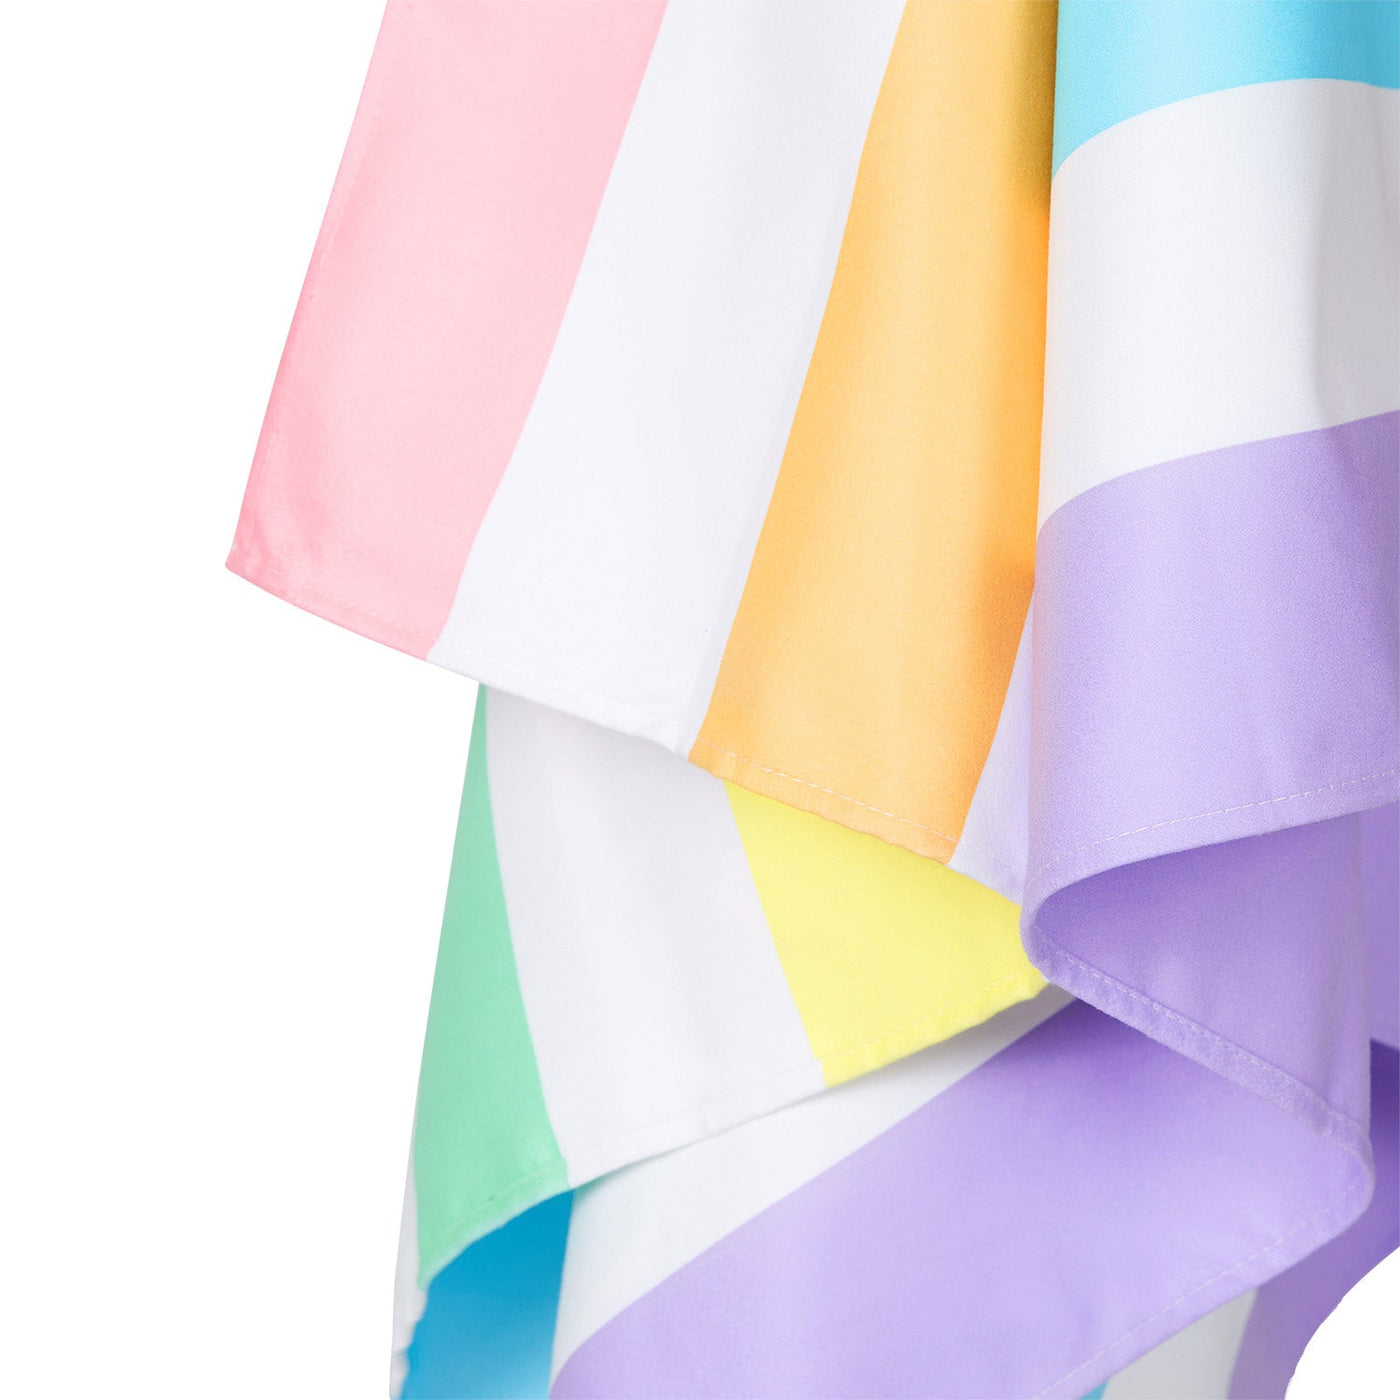 Dock & Bay - XL Summer Collection Towel - Unicorn Waves